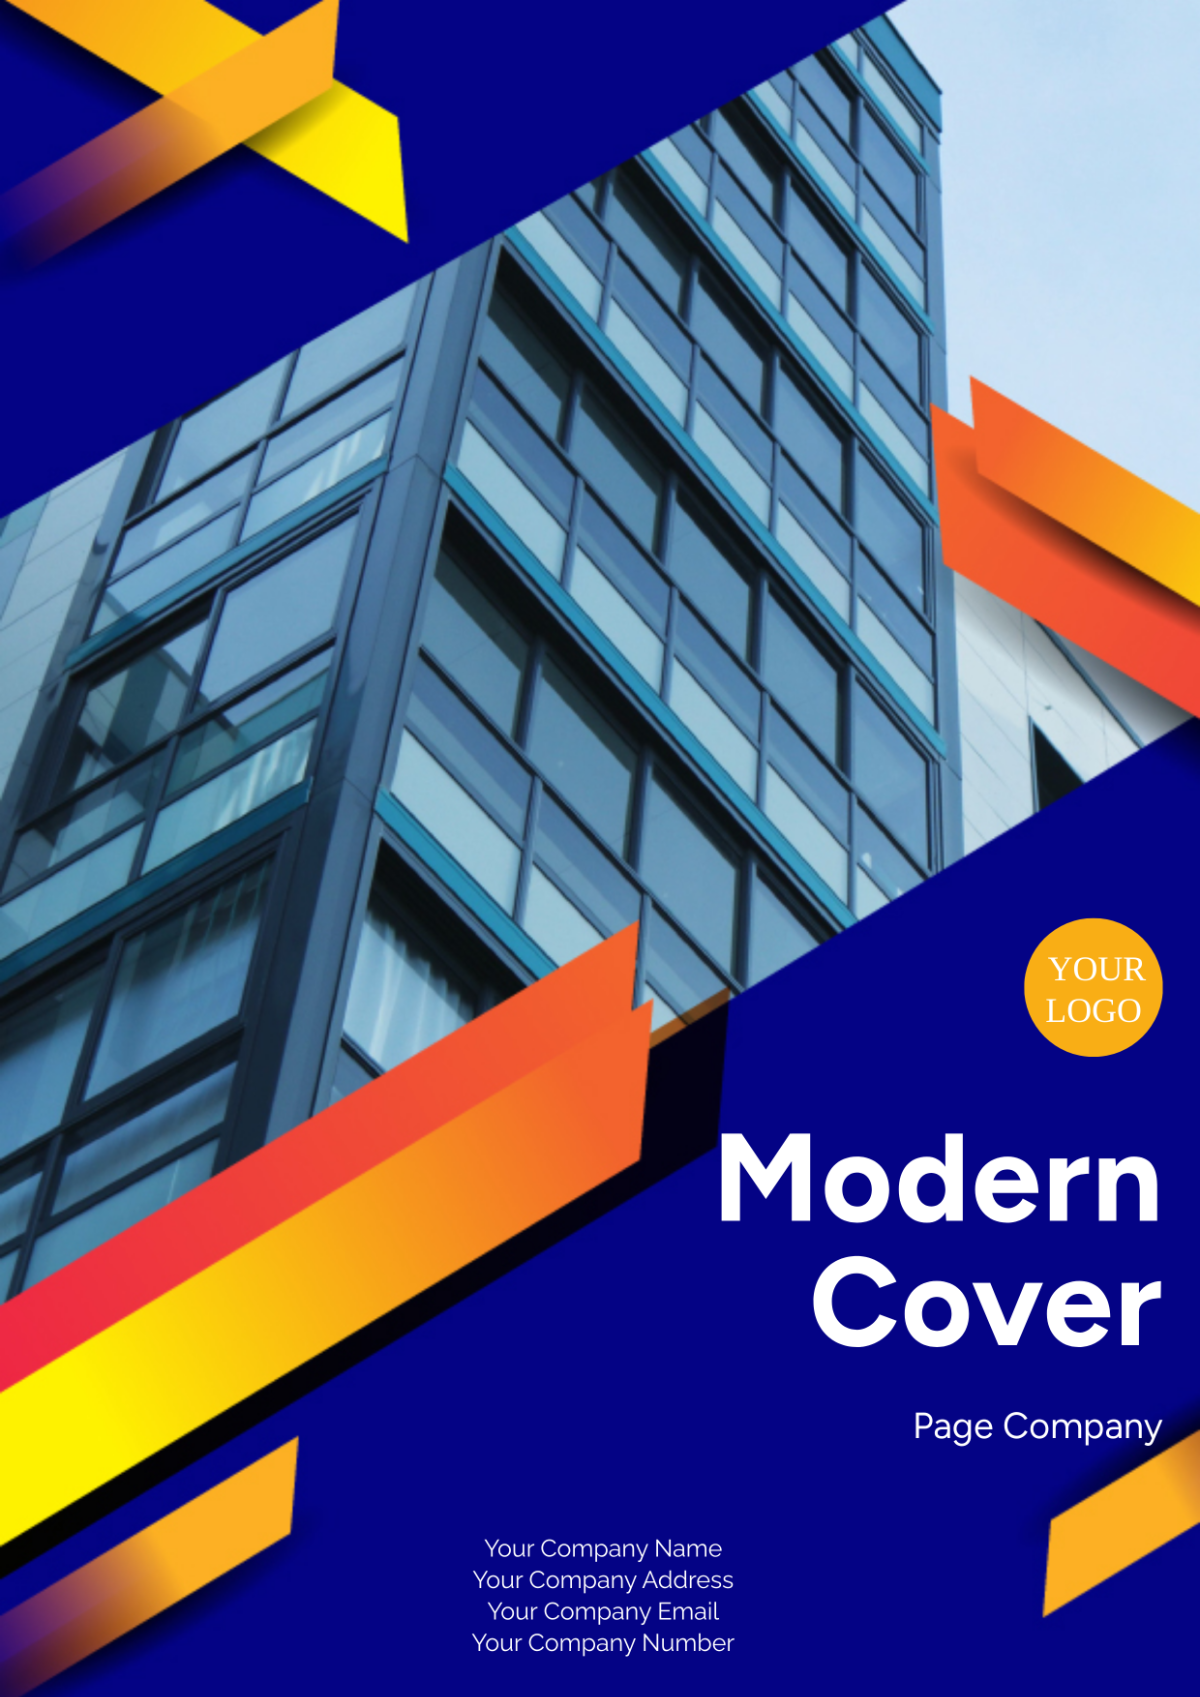 Modern Cover Page Company